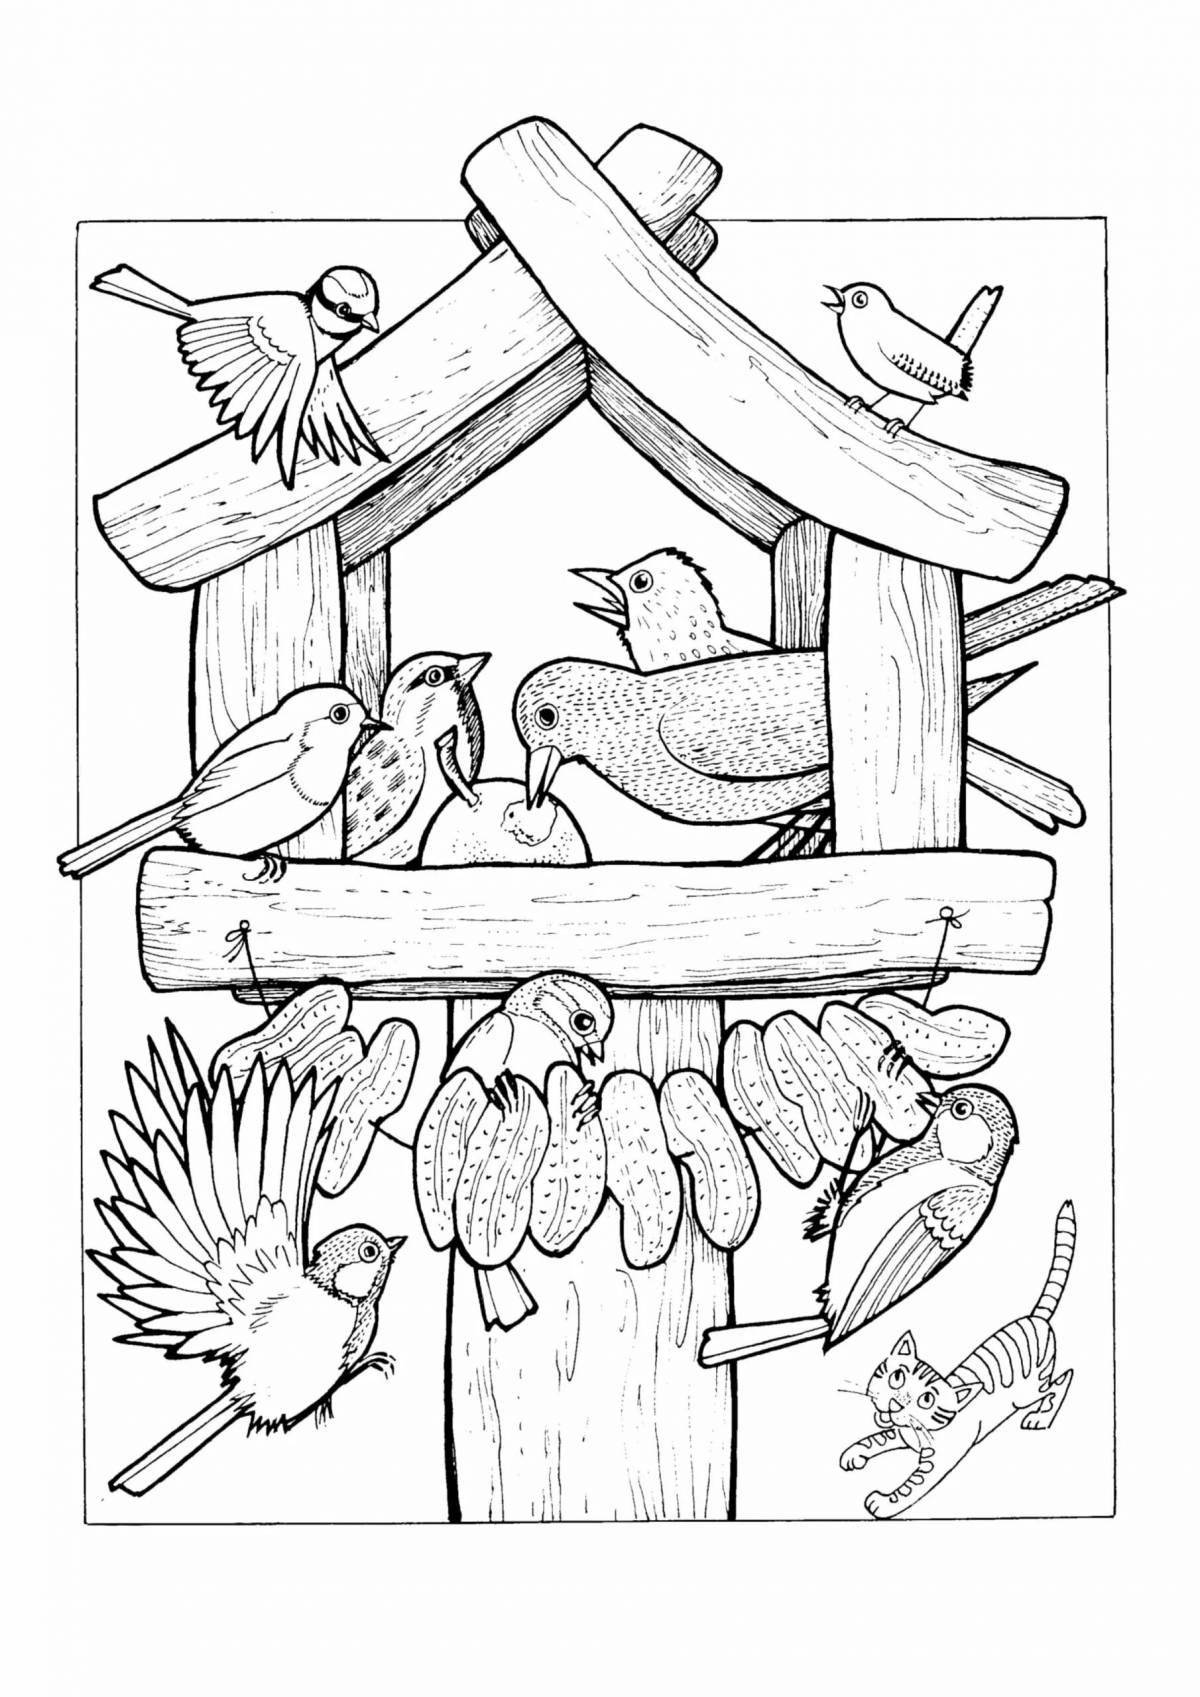 Exquisite bird feeder coloring page